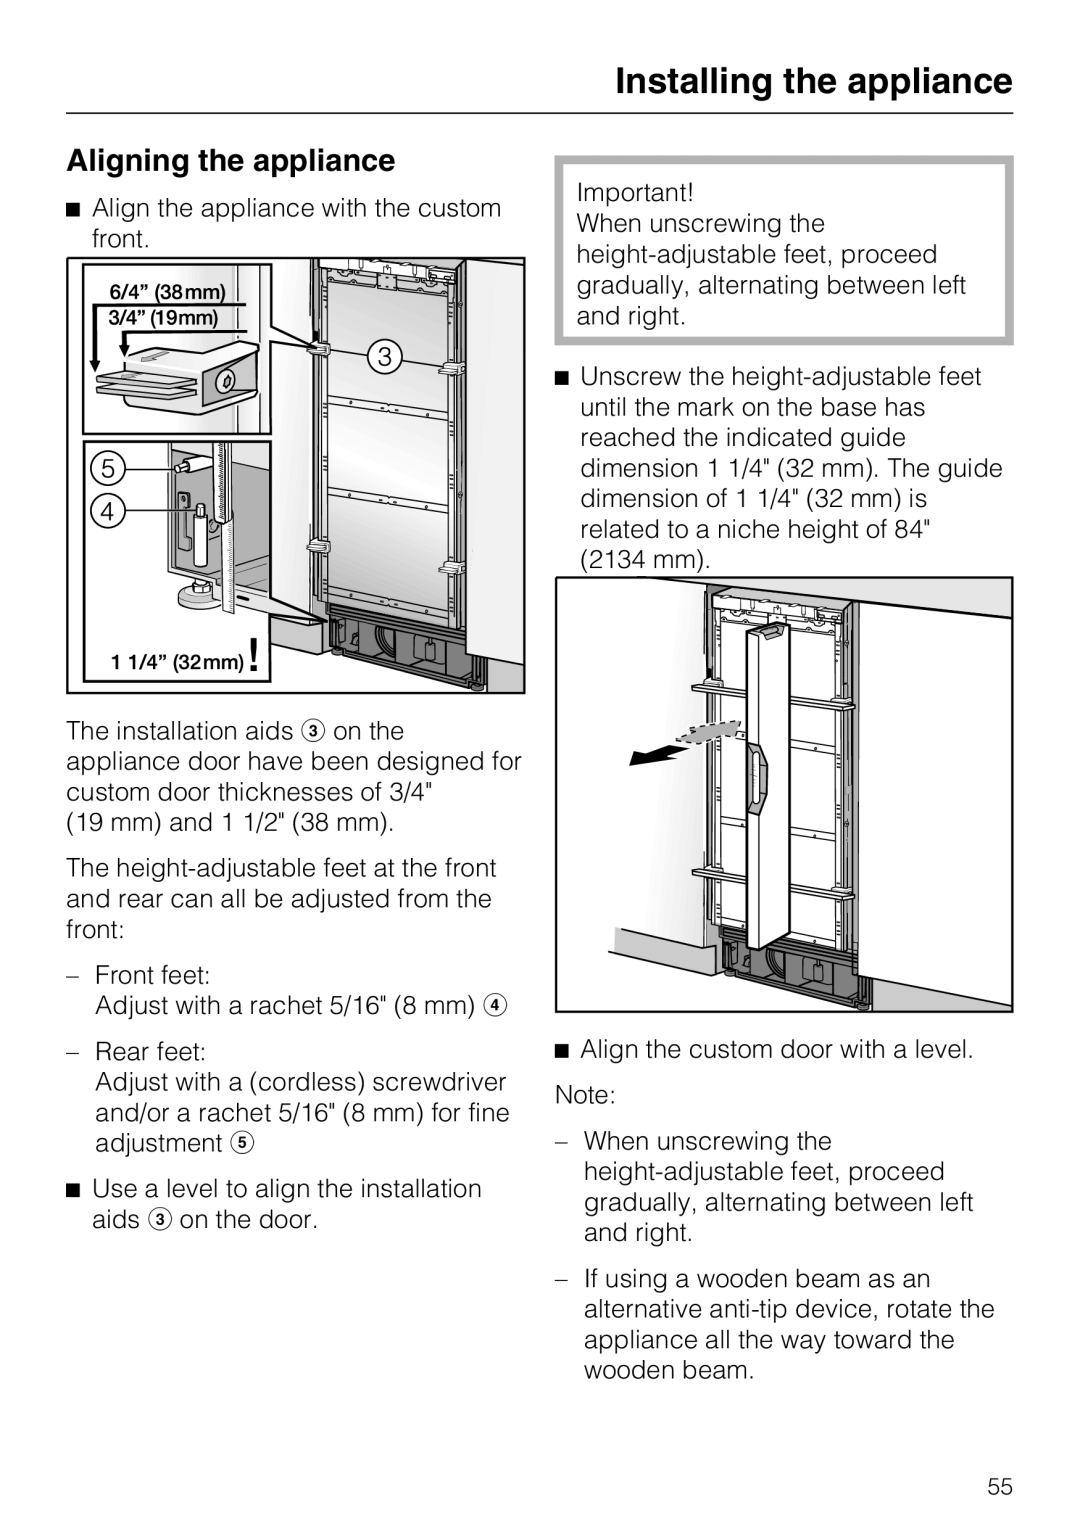 Miele 09 920 570 installation instructions Aligning the appliance, Installing the appliance 